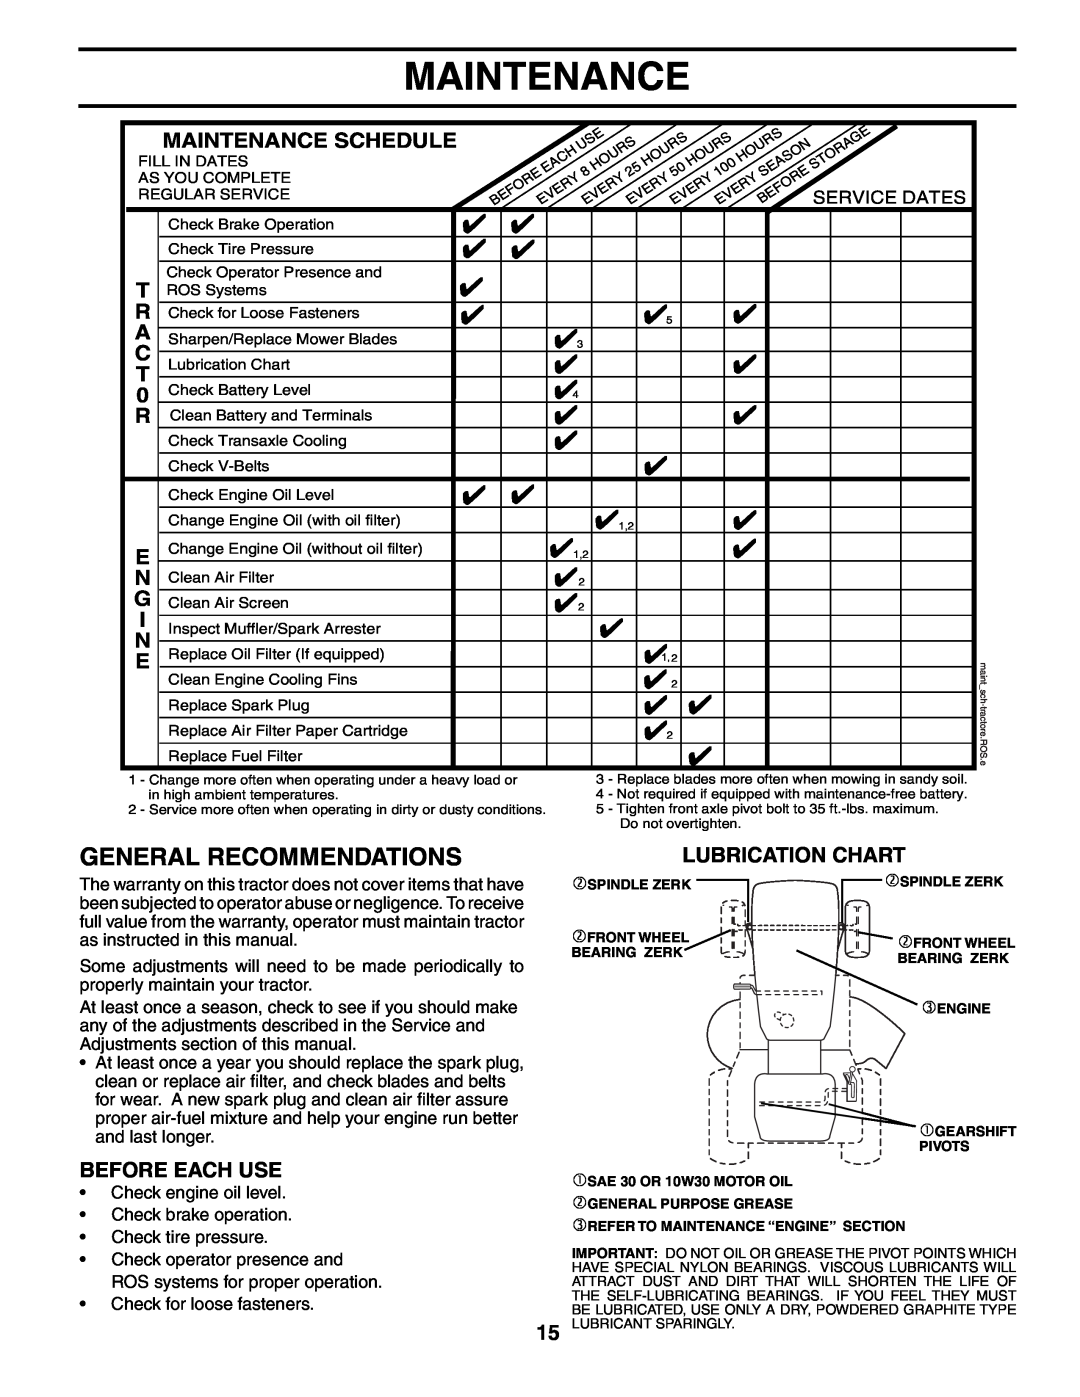 Poulan 960120003 manual General Recommendations, Maintenance Schedule, Before Each Use, Lubrication Chart 